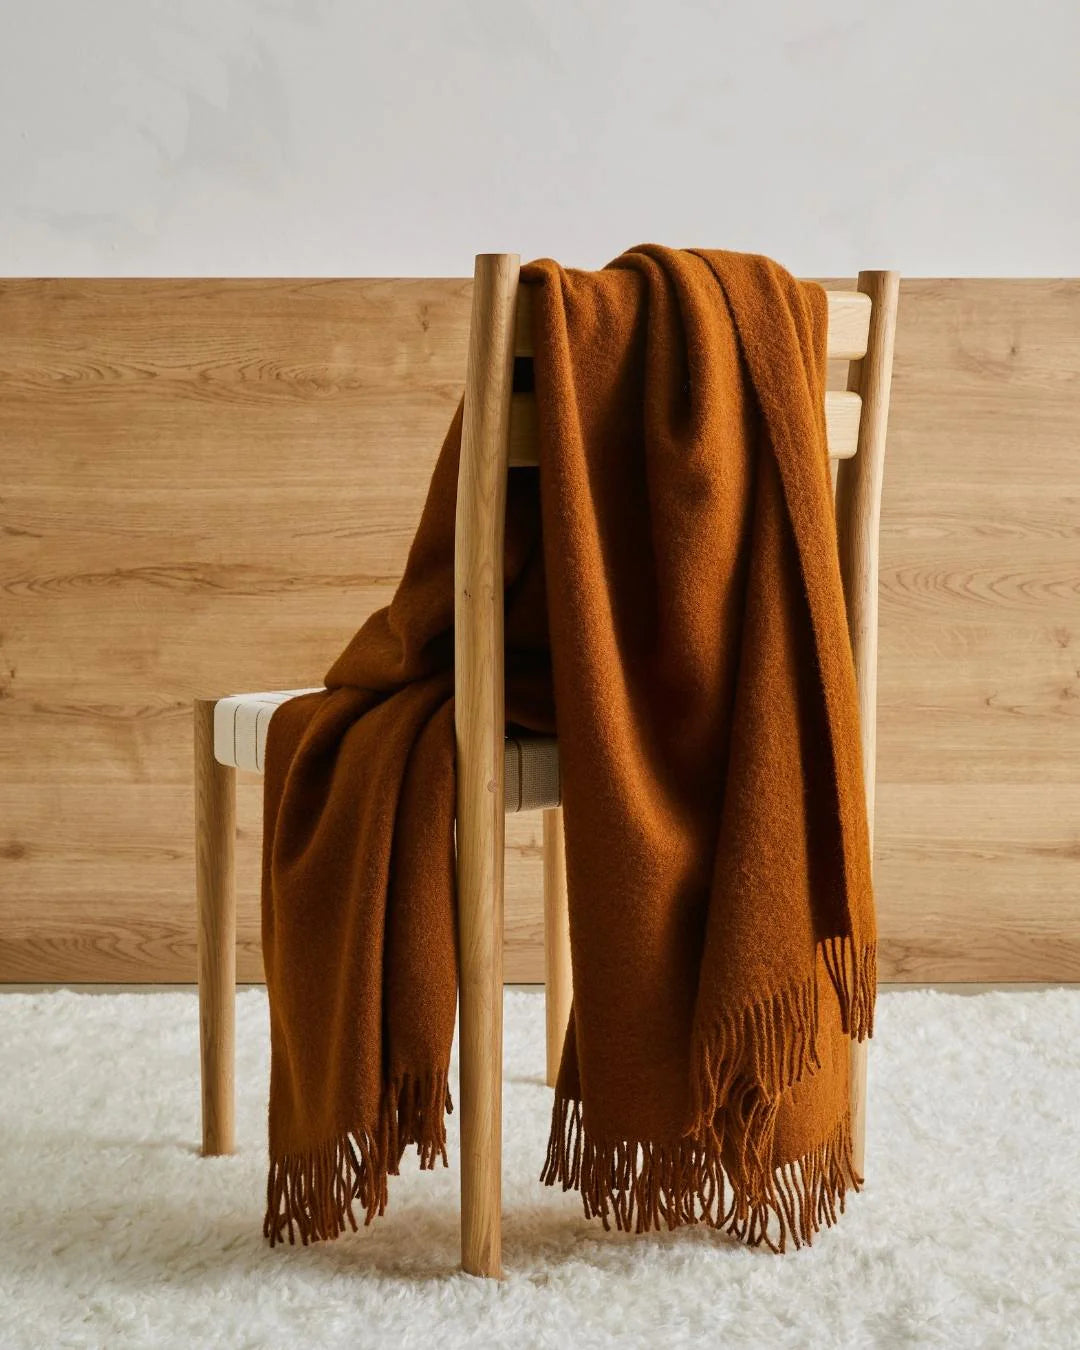 Made from 100% New Zealand lambswool, Nevis throw blankets in spice are simply luxurious. All of our throws make the perfect companion over cooler days and nights, and can also be enjoyed outdoors